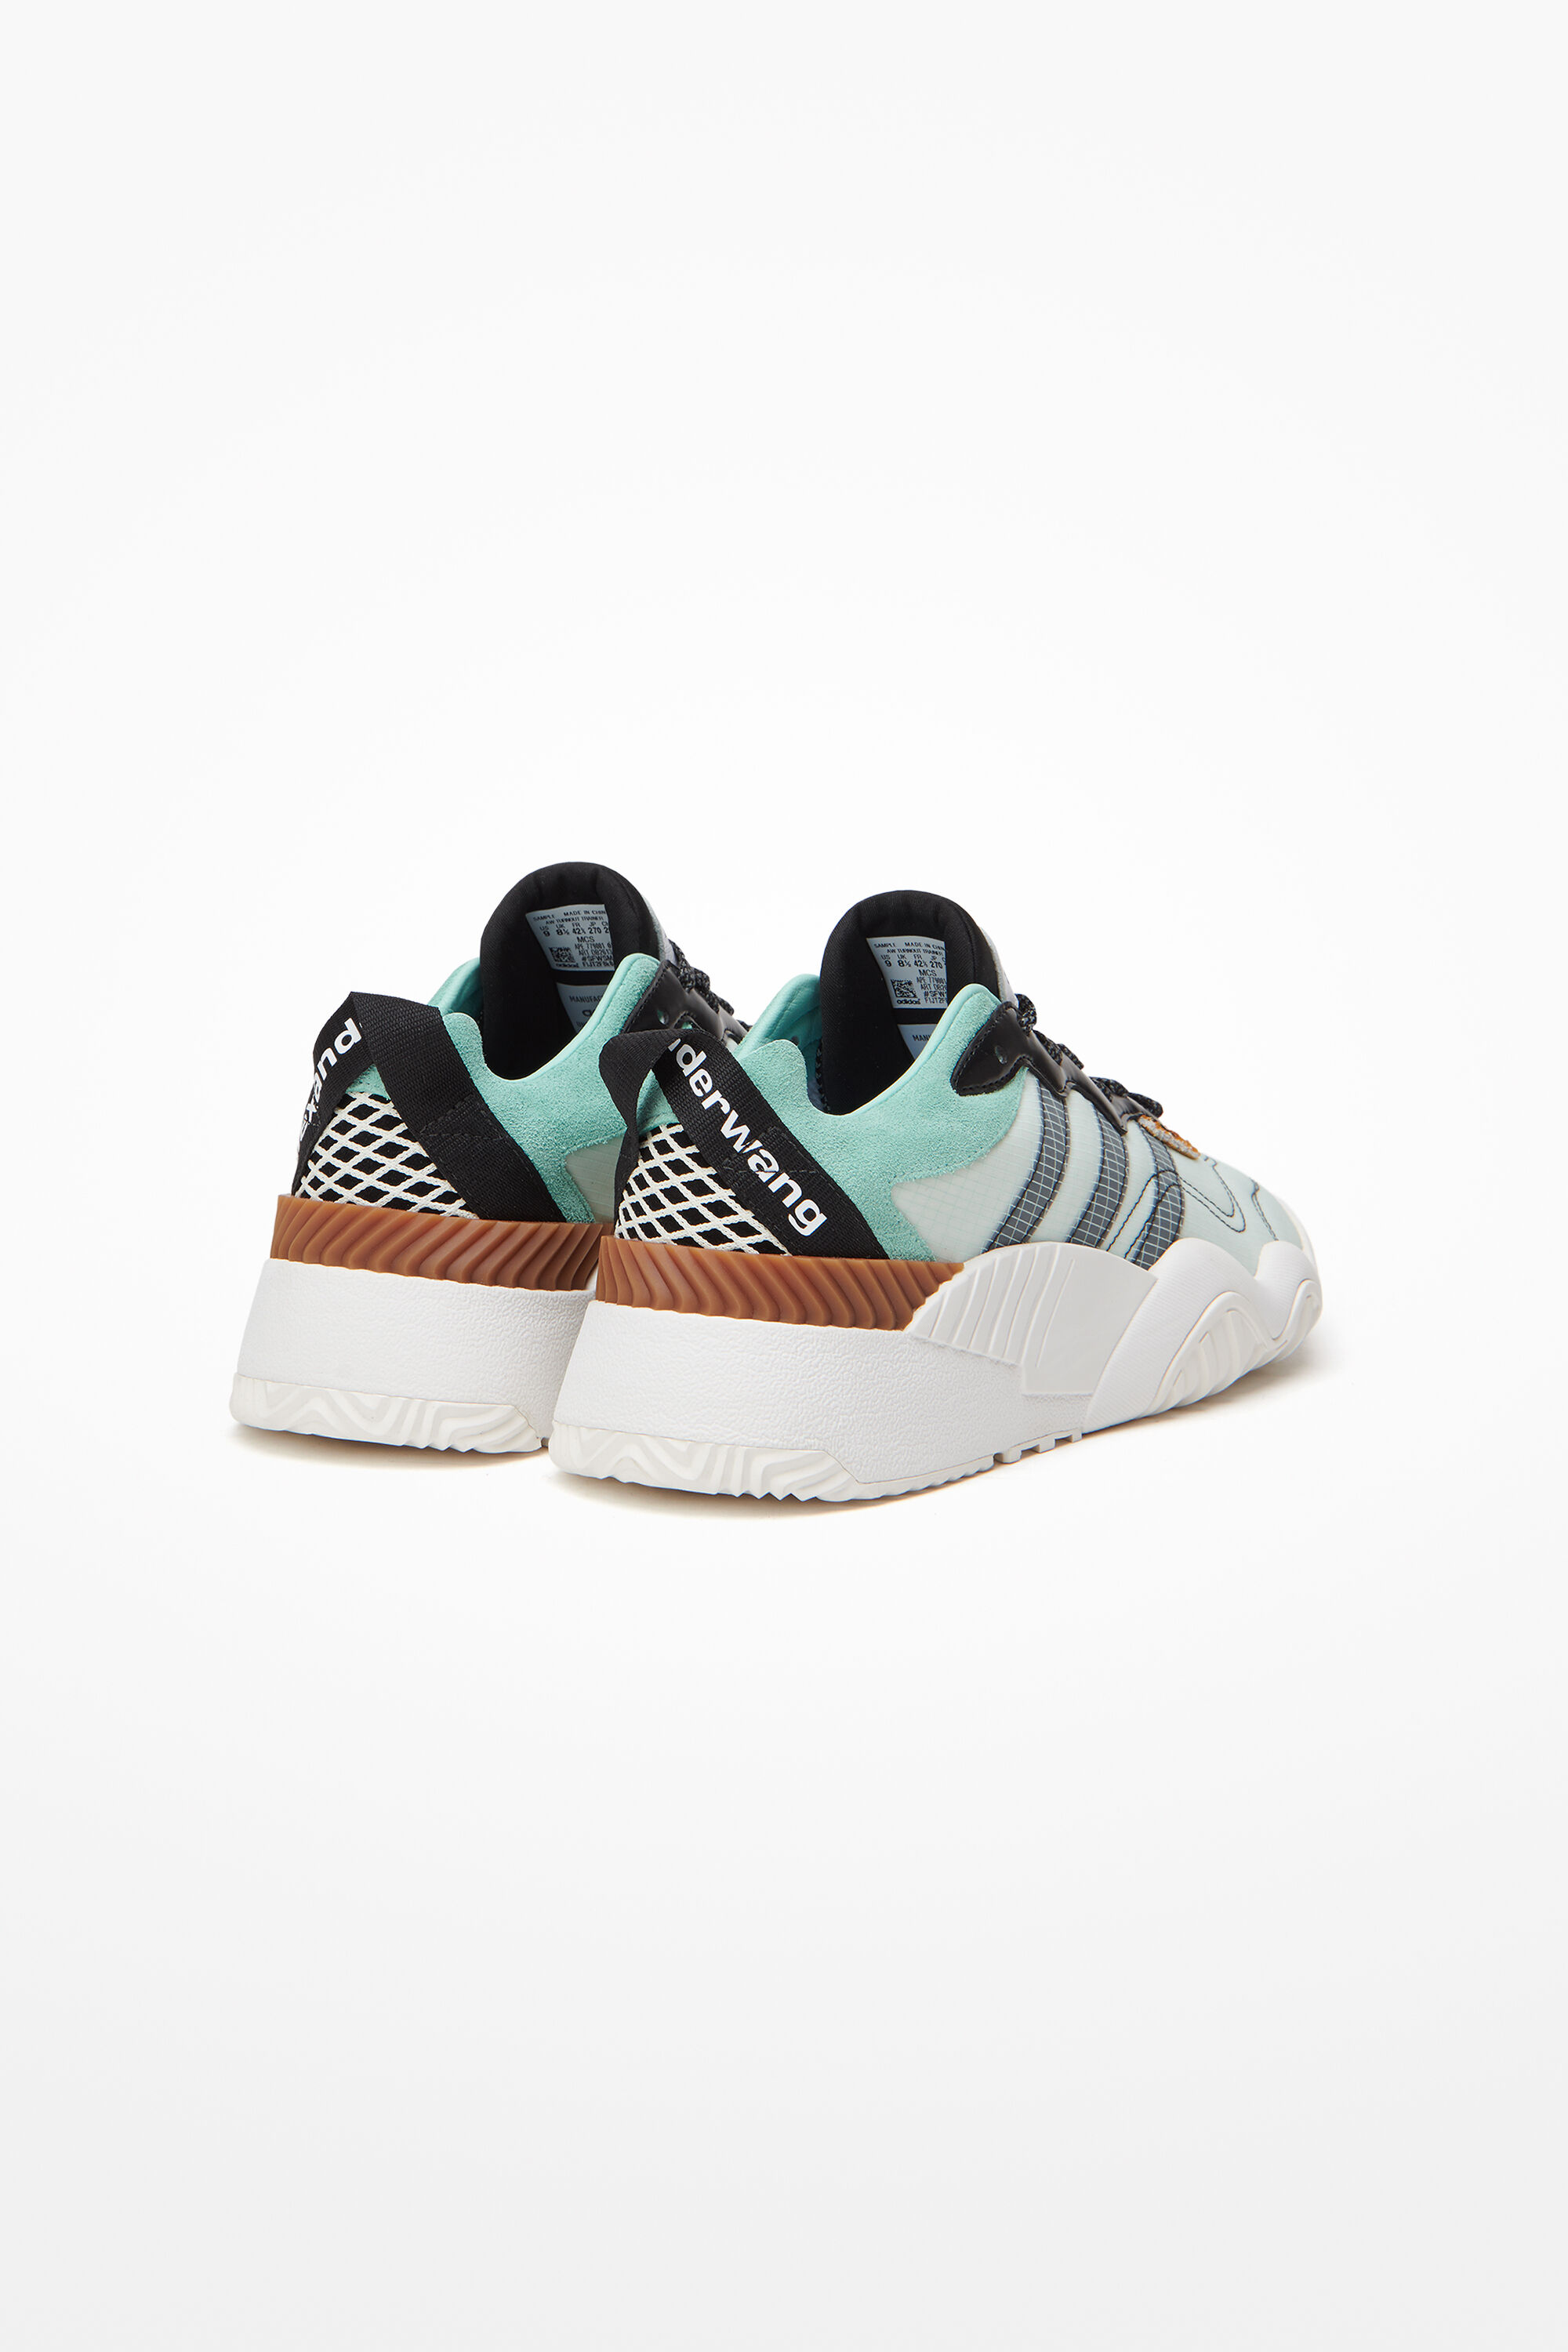 adidas originals by alexander wang aw turnout trainers